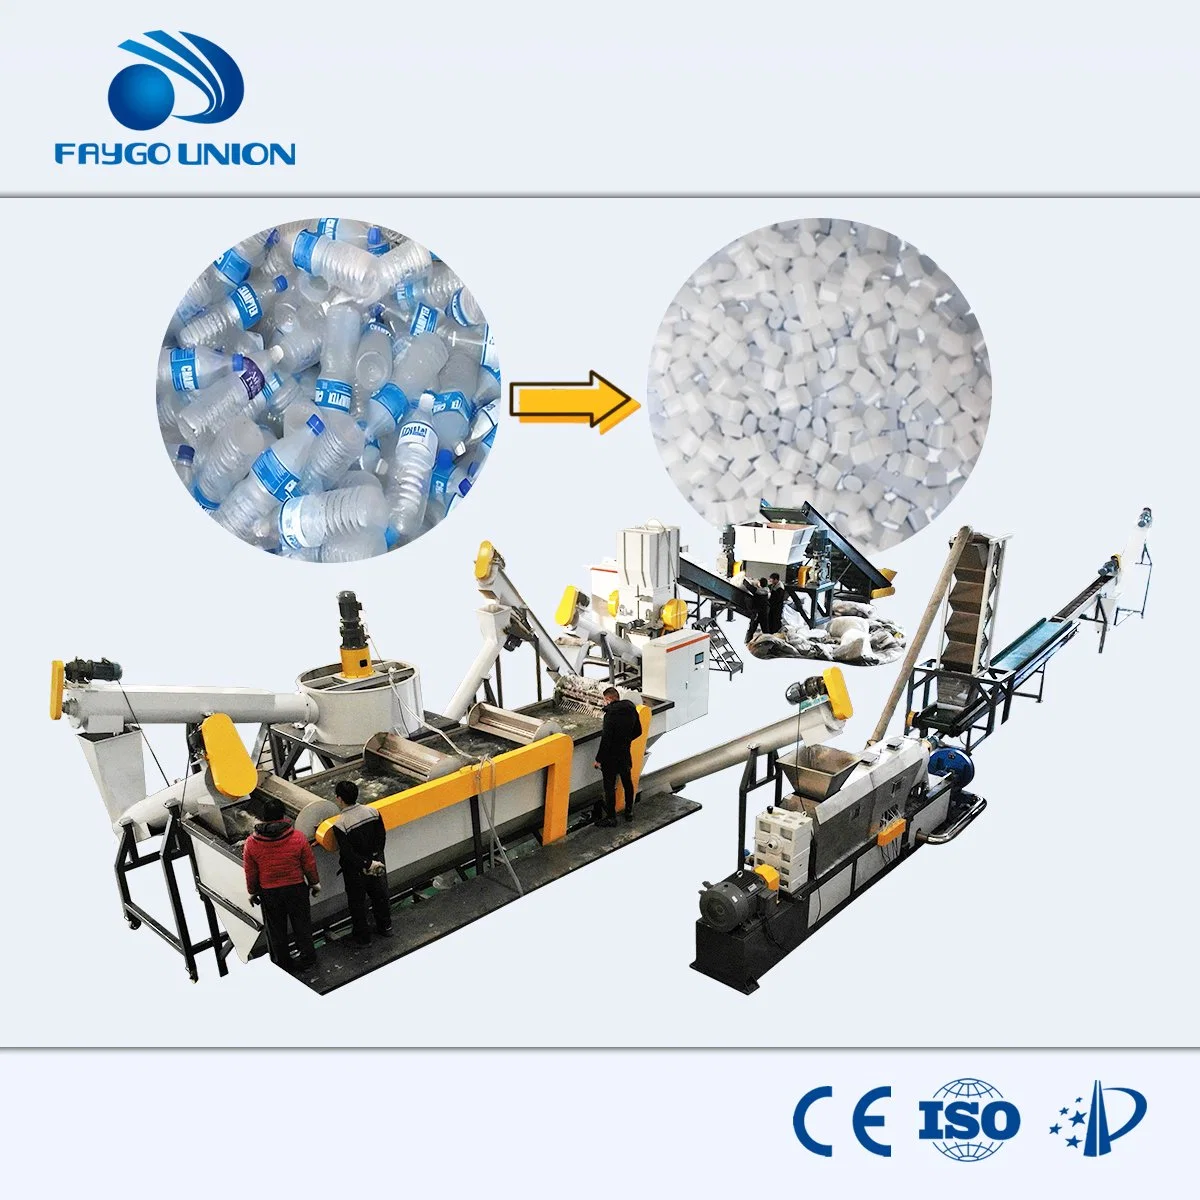 Plastic Recycling Machine Waste Pet Water Bottles PP PE Agricultural Films Jumbo Woven Bags HDPE Jar Crushing Washing Drying Production Line Recycle Equipment